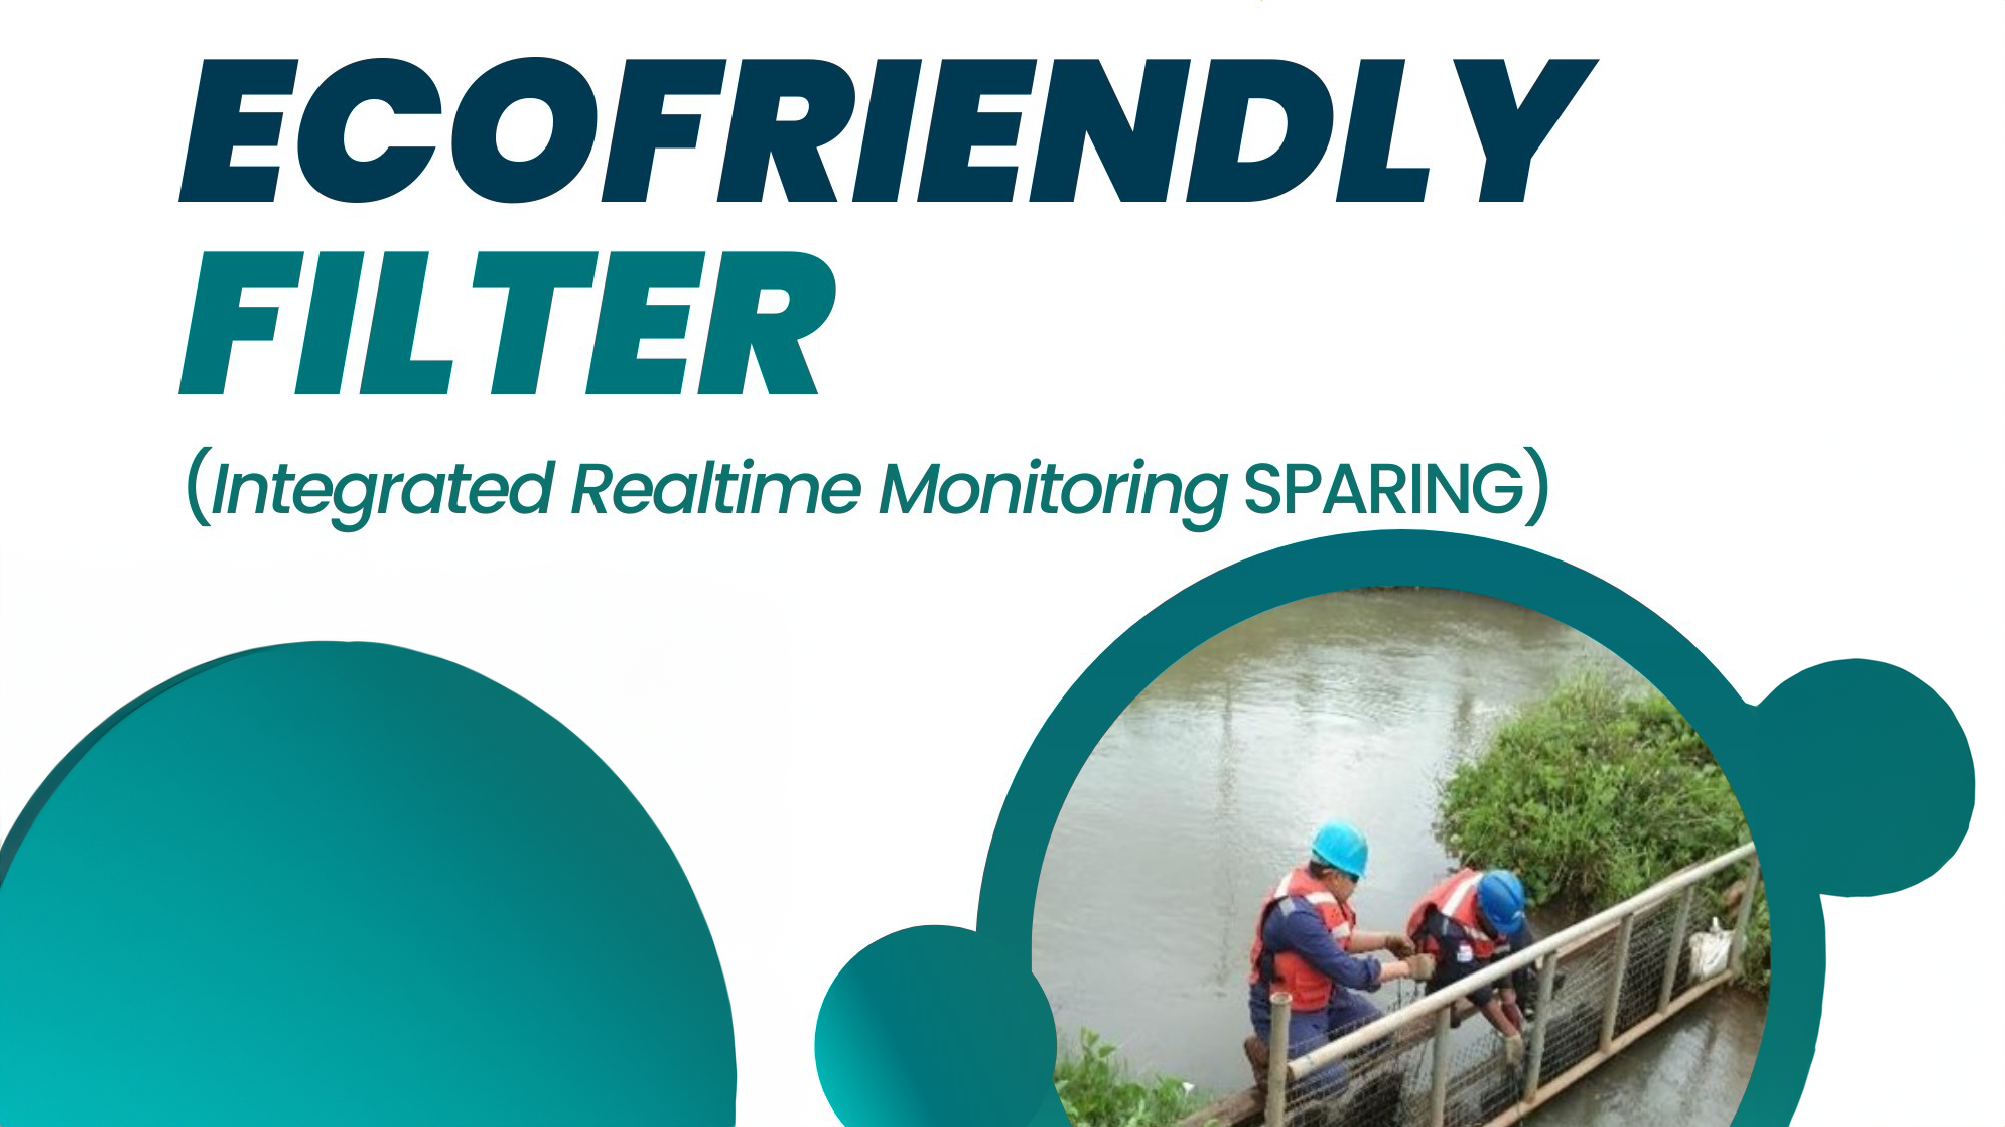 Ecofriendly Filter (Integrated Realtime Monitoring SPARING)